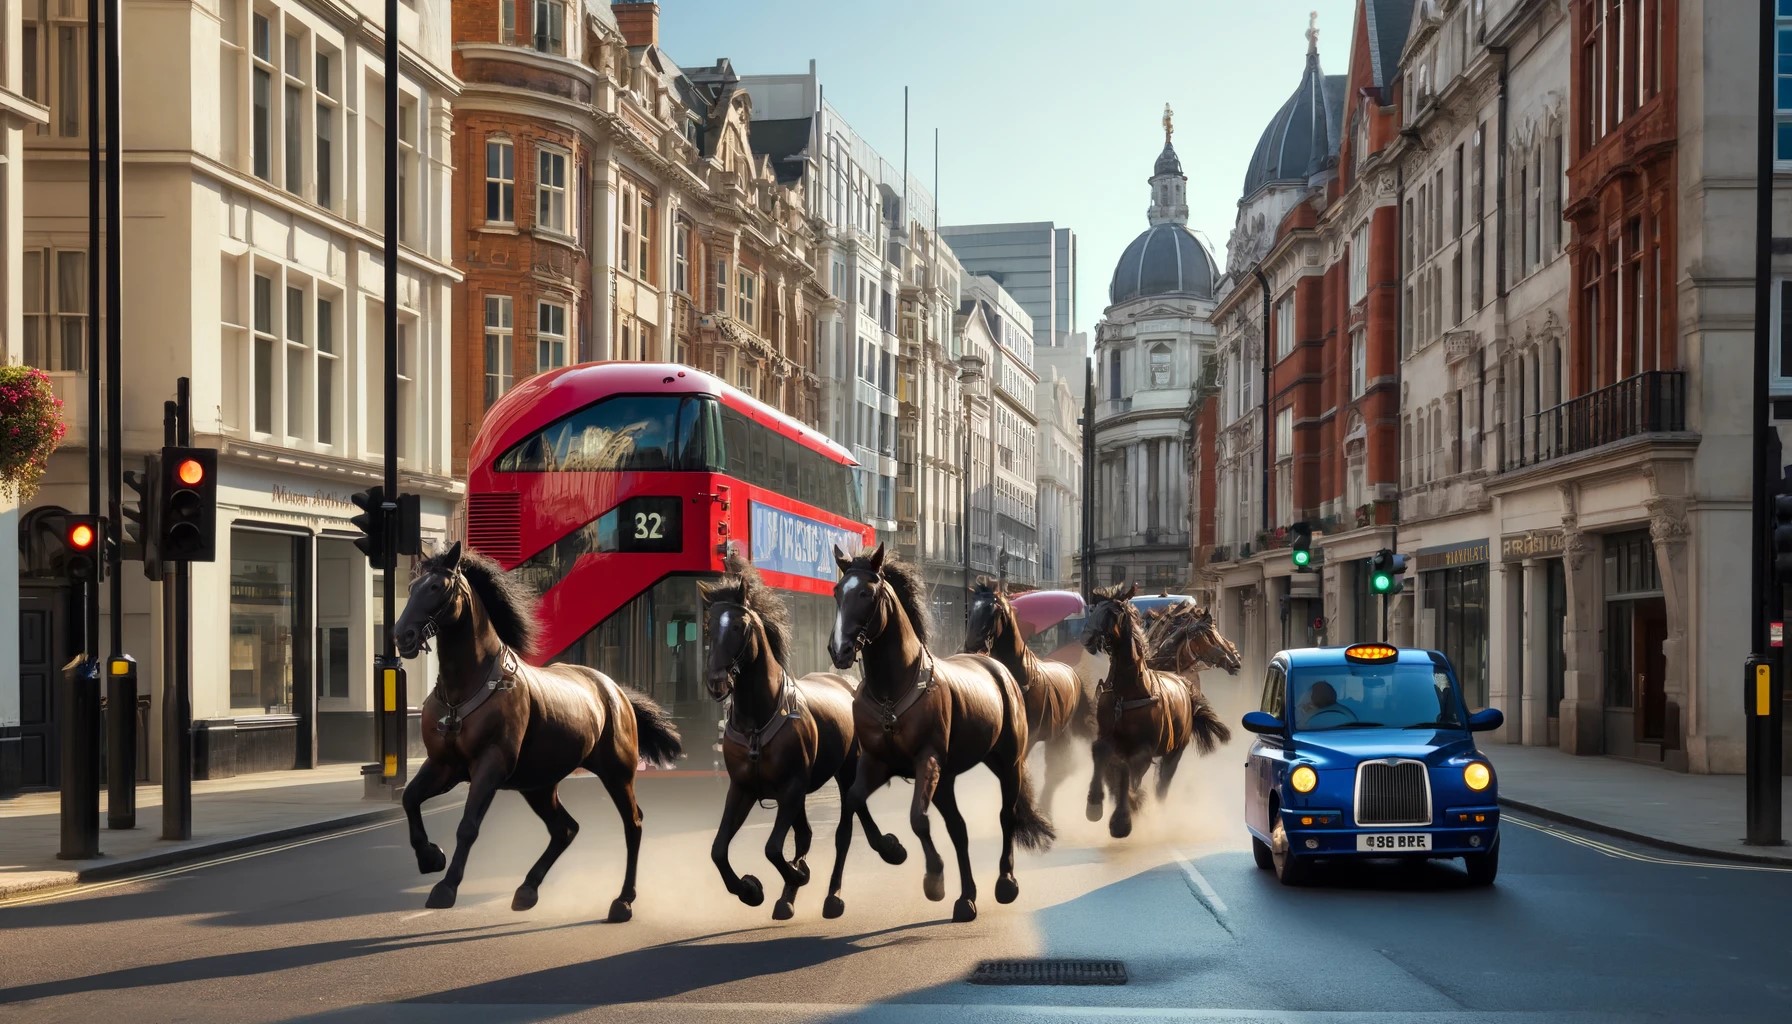 DALL-E imagines the King's horses running amok in London